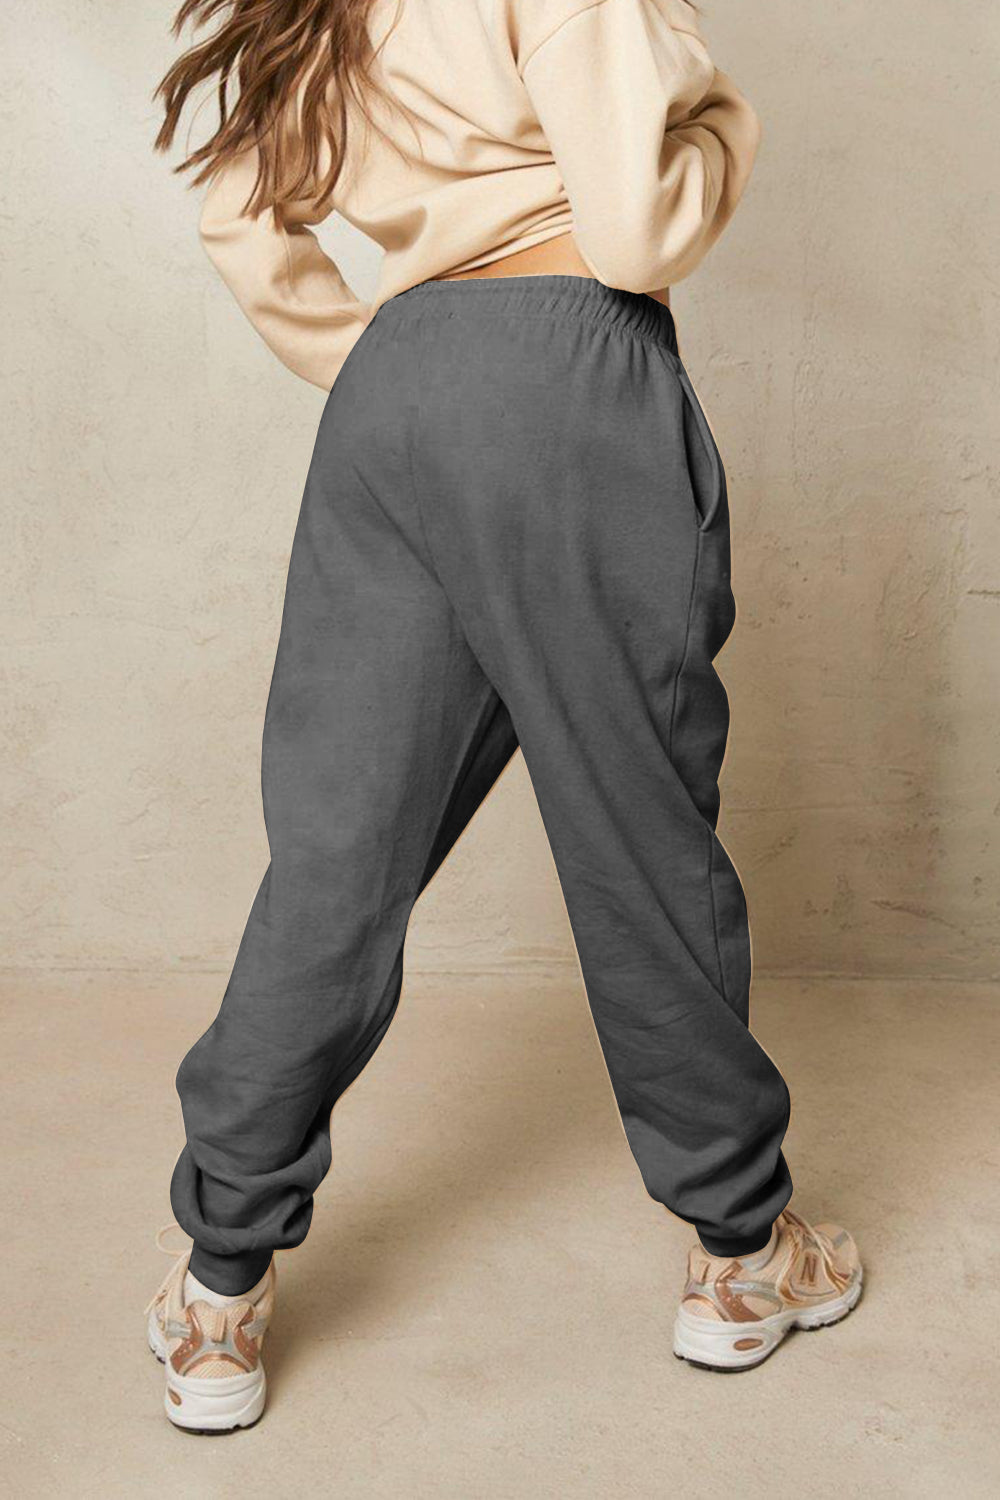 Simply Love Simply Love Full Size Drawstring Heart Graphic Long Sweatpants